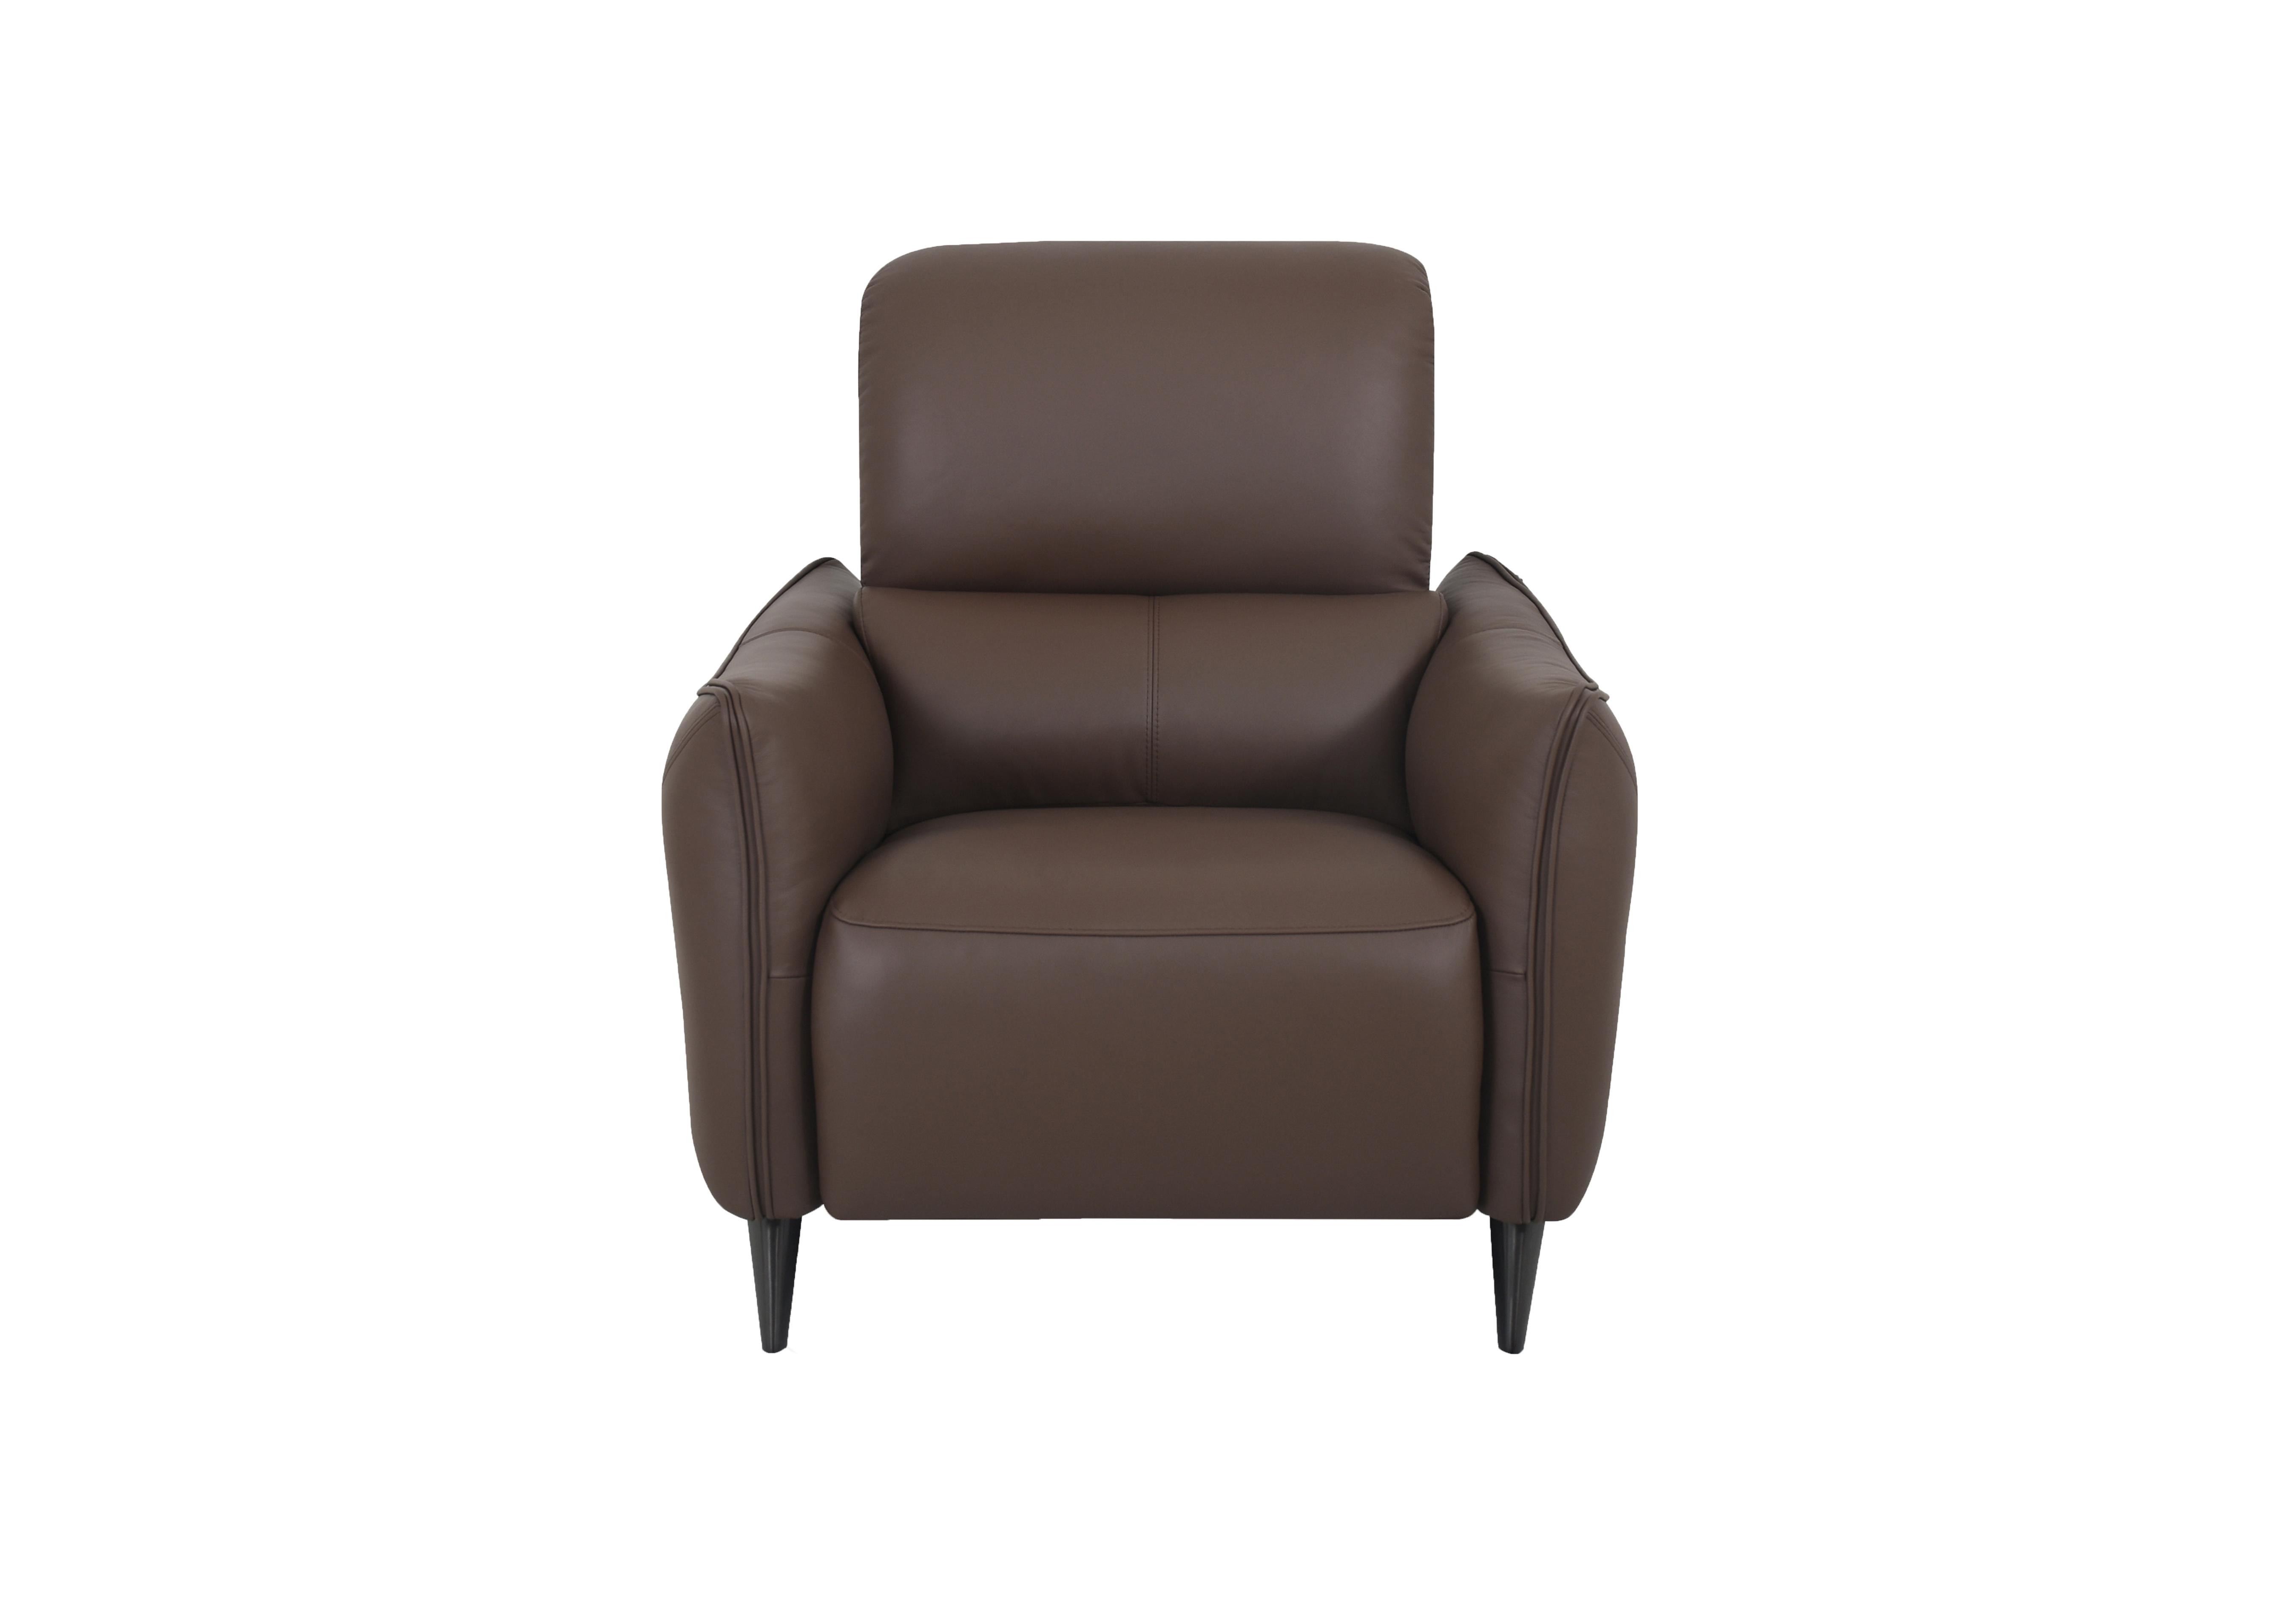 Maddox Leather Chair in Nn-512e Cacao Brown on Furniture Village